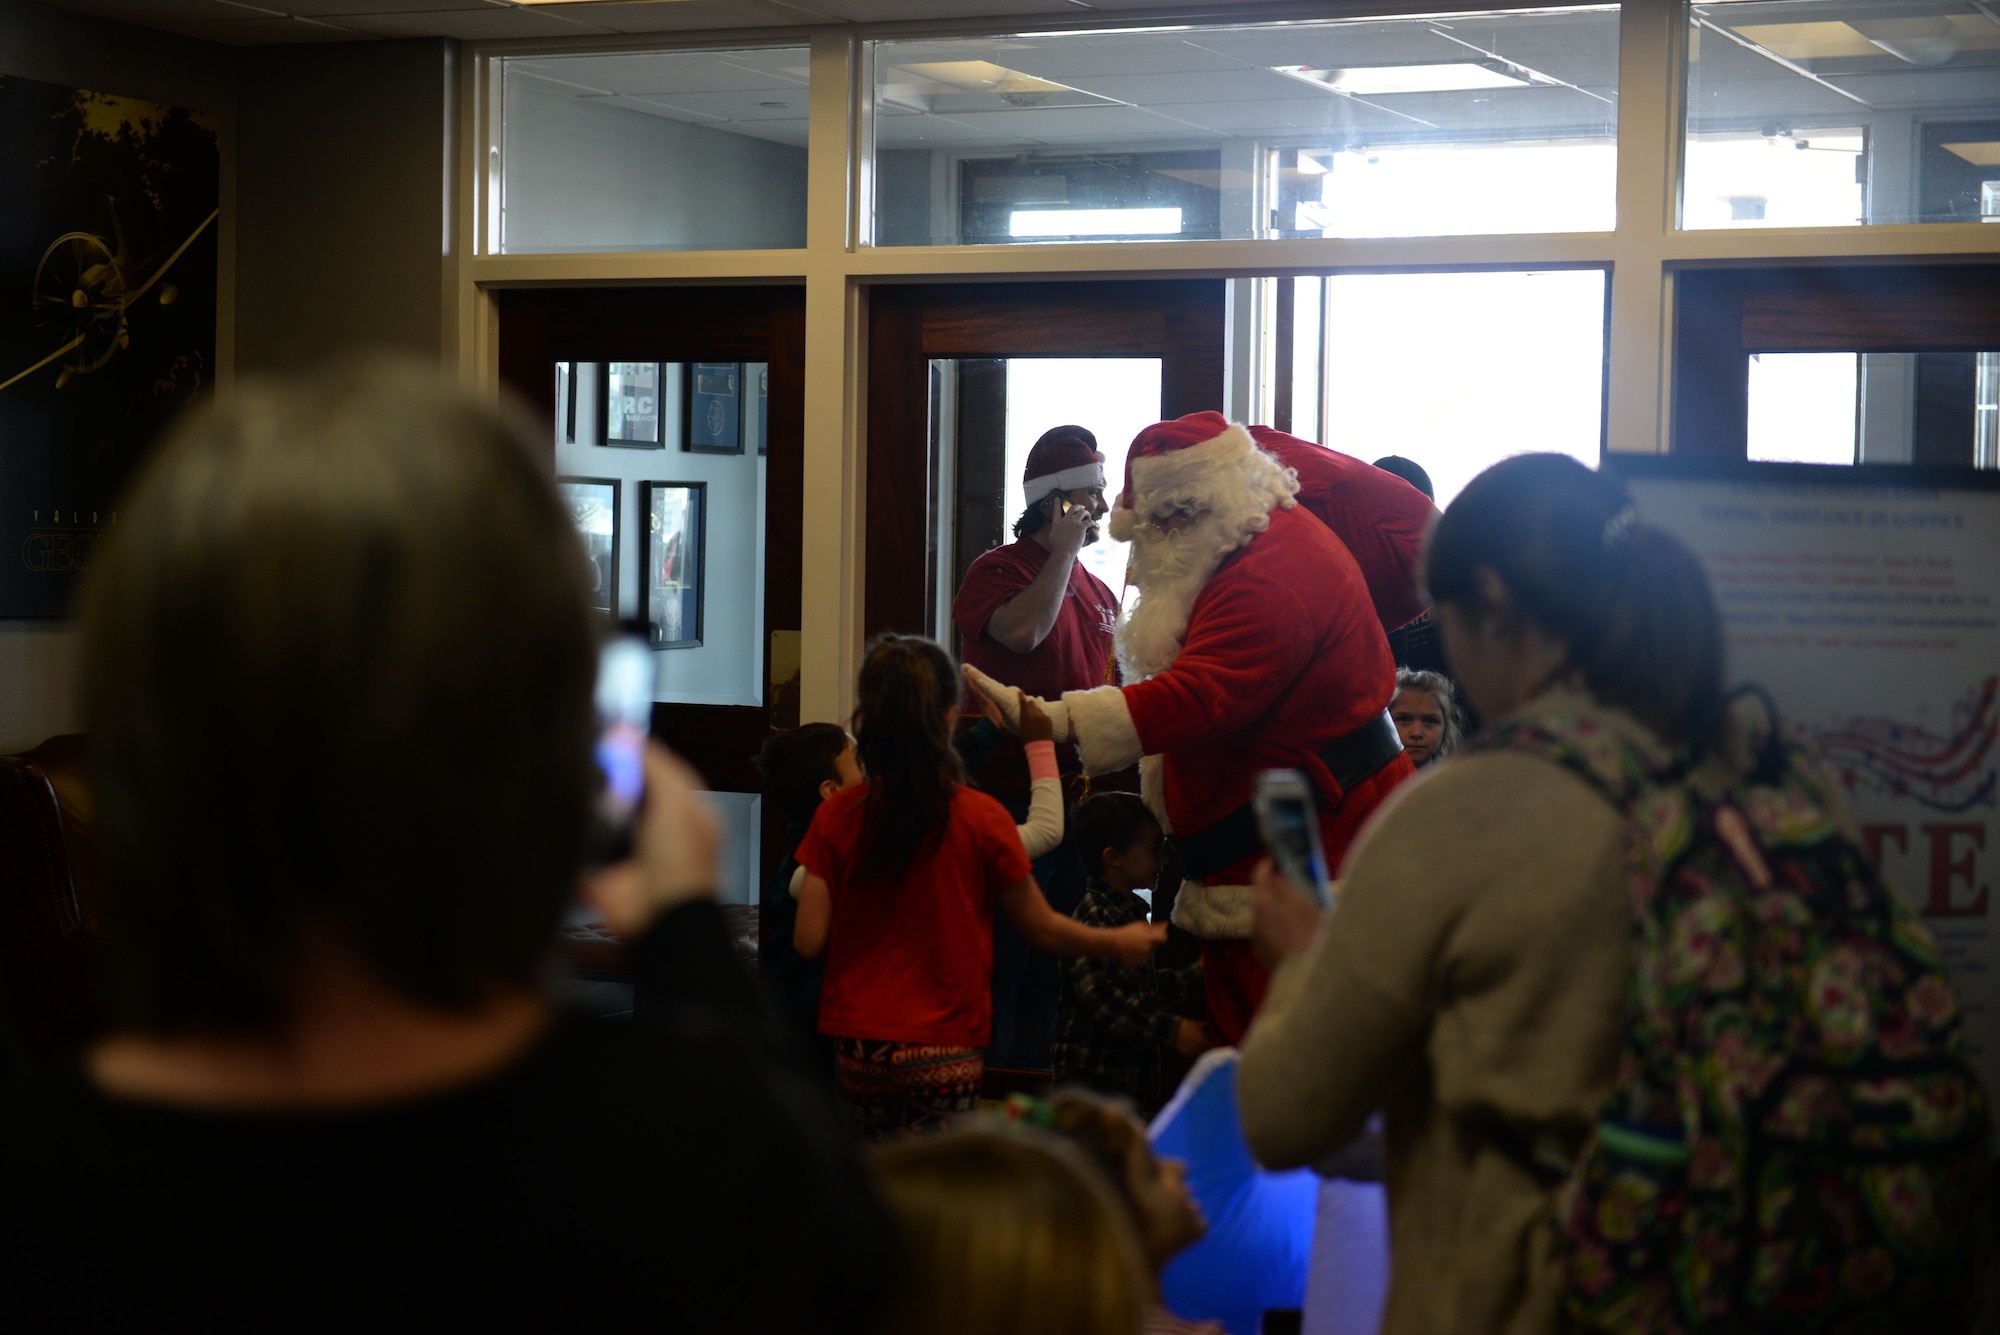 Children and family members welcome Santa Claus at the entrance of the Columbus Club during Breakfast with Santa, Dec. 14, 2019, on Columbus Air Force Base, Miss. Santa previously visited Columbus AFB Dec. 3 after he arrived on base in a T-1A Jayhawk to parade down to the tree lighting ceremony. (U.S. Air Force photo by Airman 1st Class Hannah Bean)